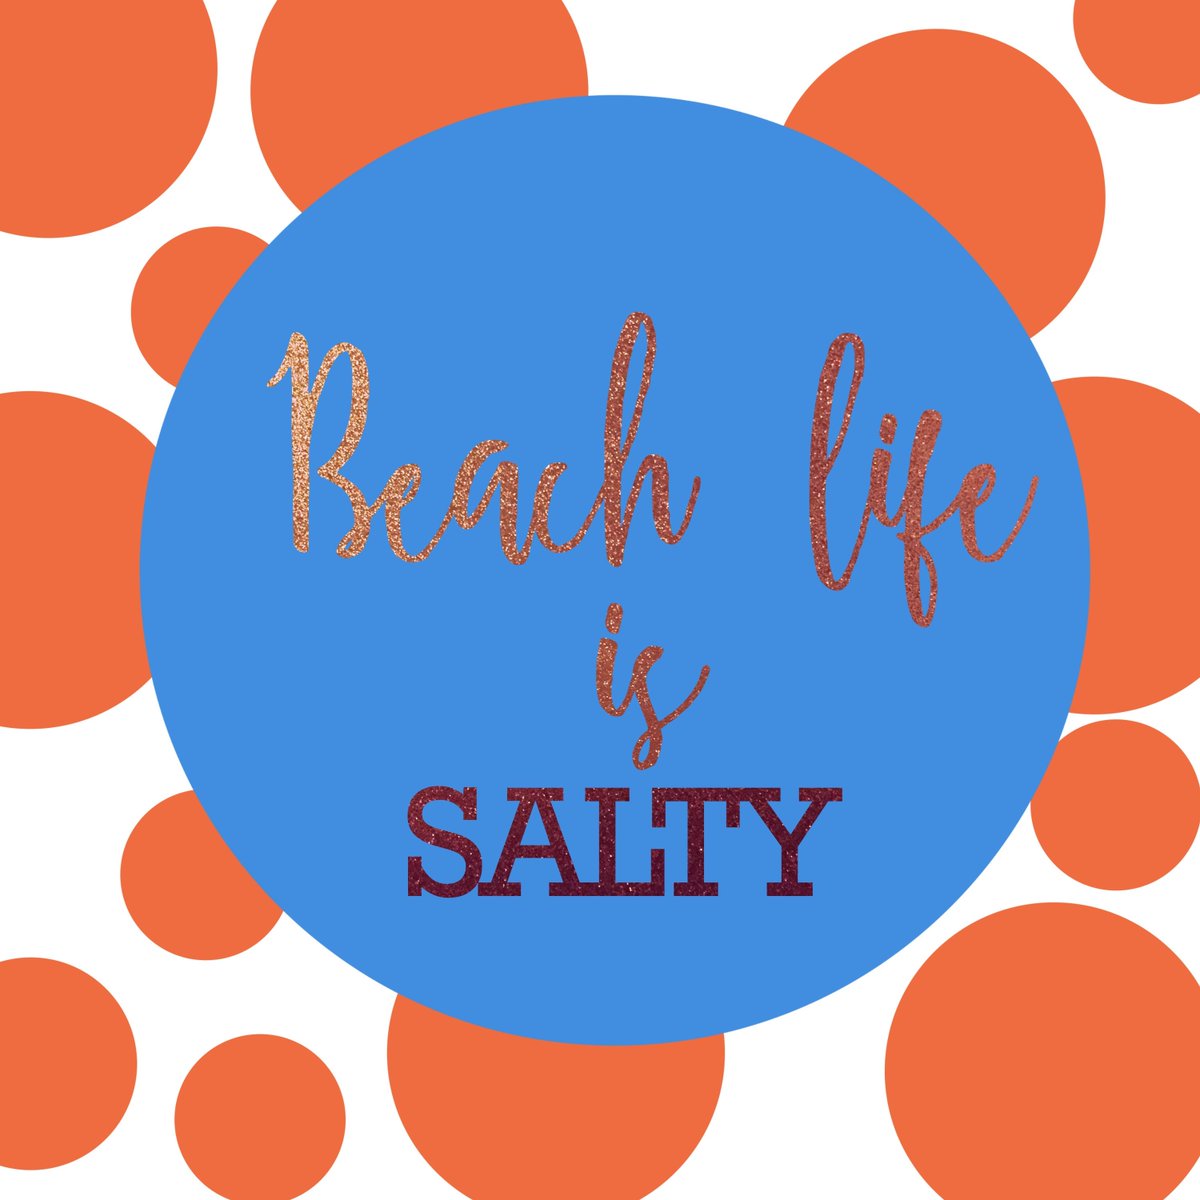 Excited to share the latest addition to my #etsy shop: Digital Print - Beach Life is Salty - 300 DPI etsy.me/2K3SQdB #art #print #digital #beachlife #digitalprint #blankjournal #printable #digitalplanner #books